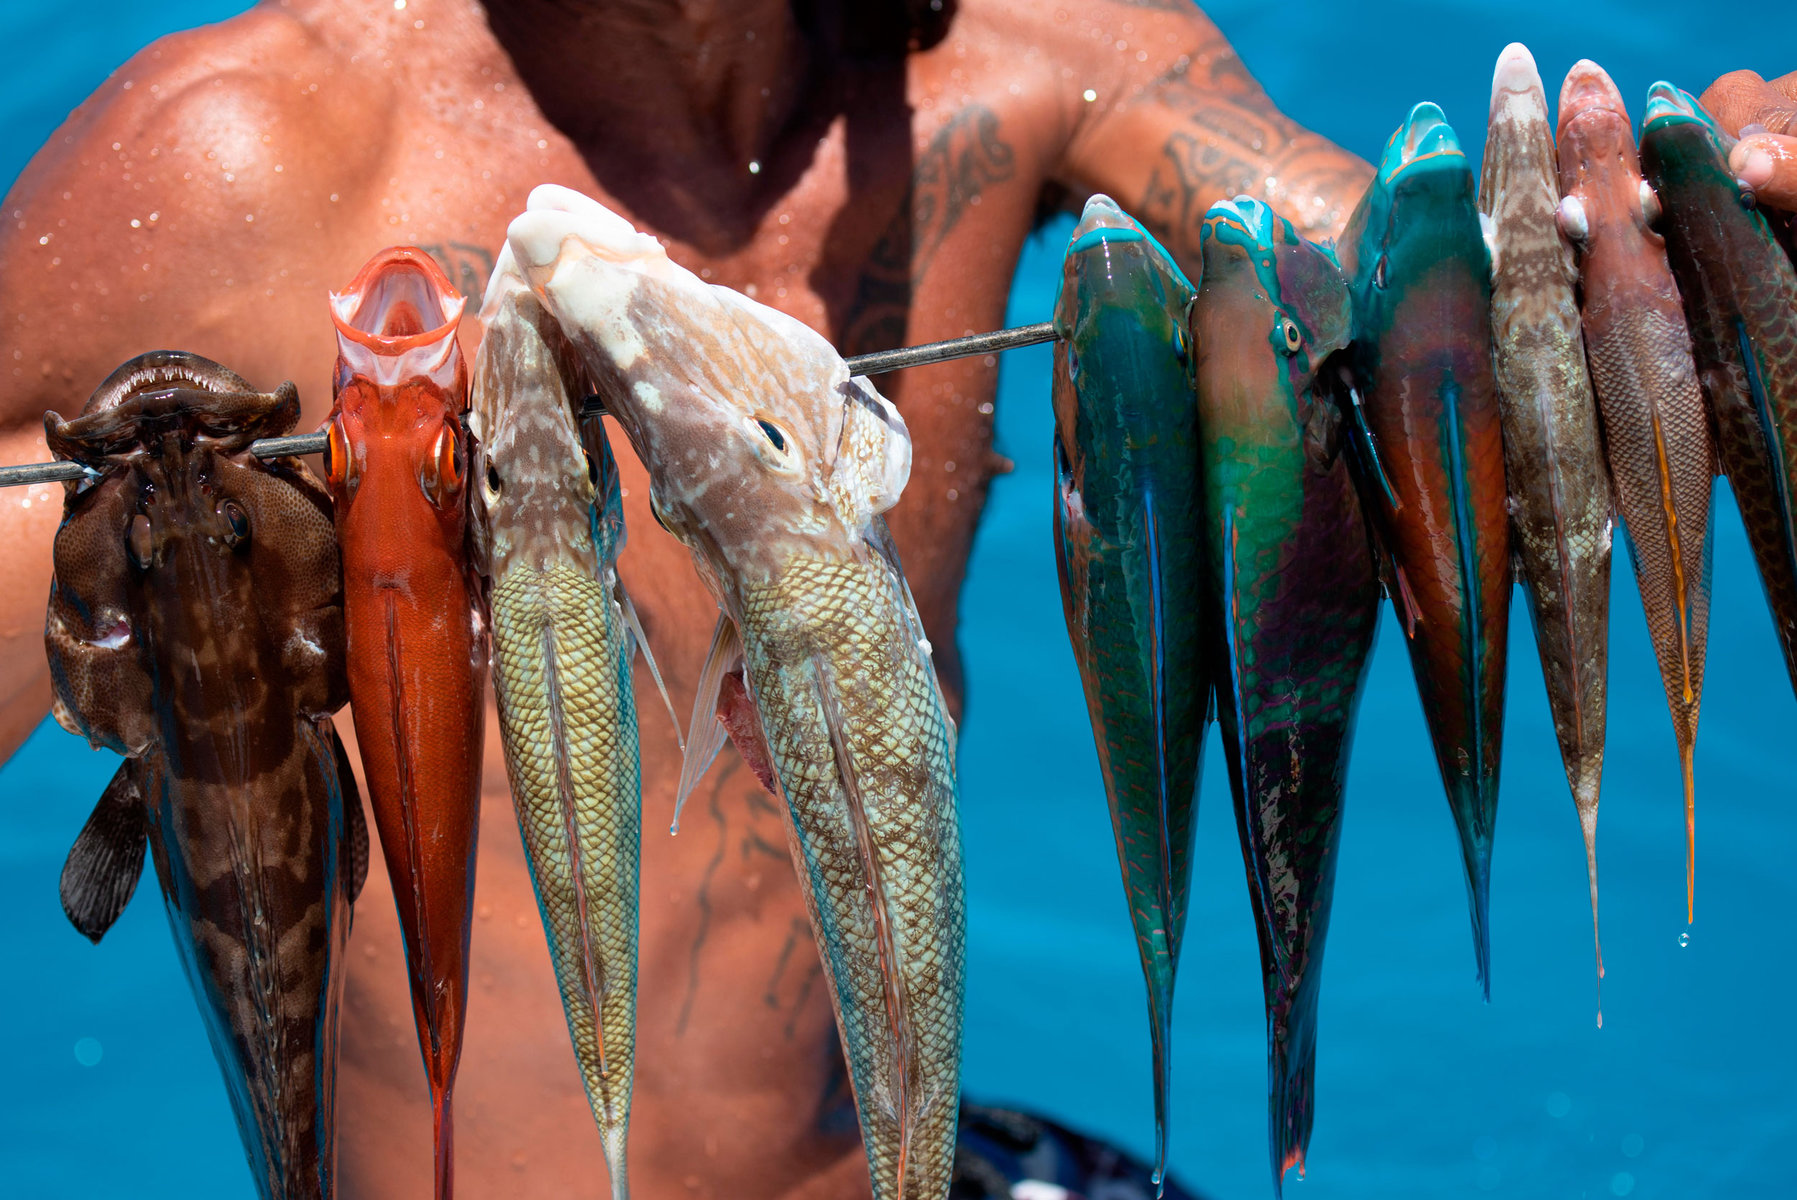 Colorful fish have been caught and hang from a line.